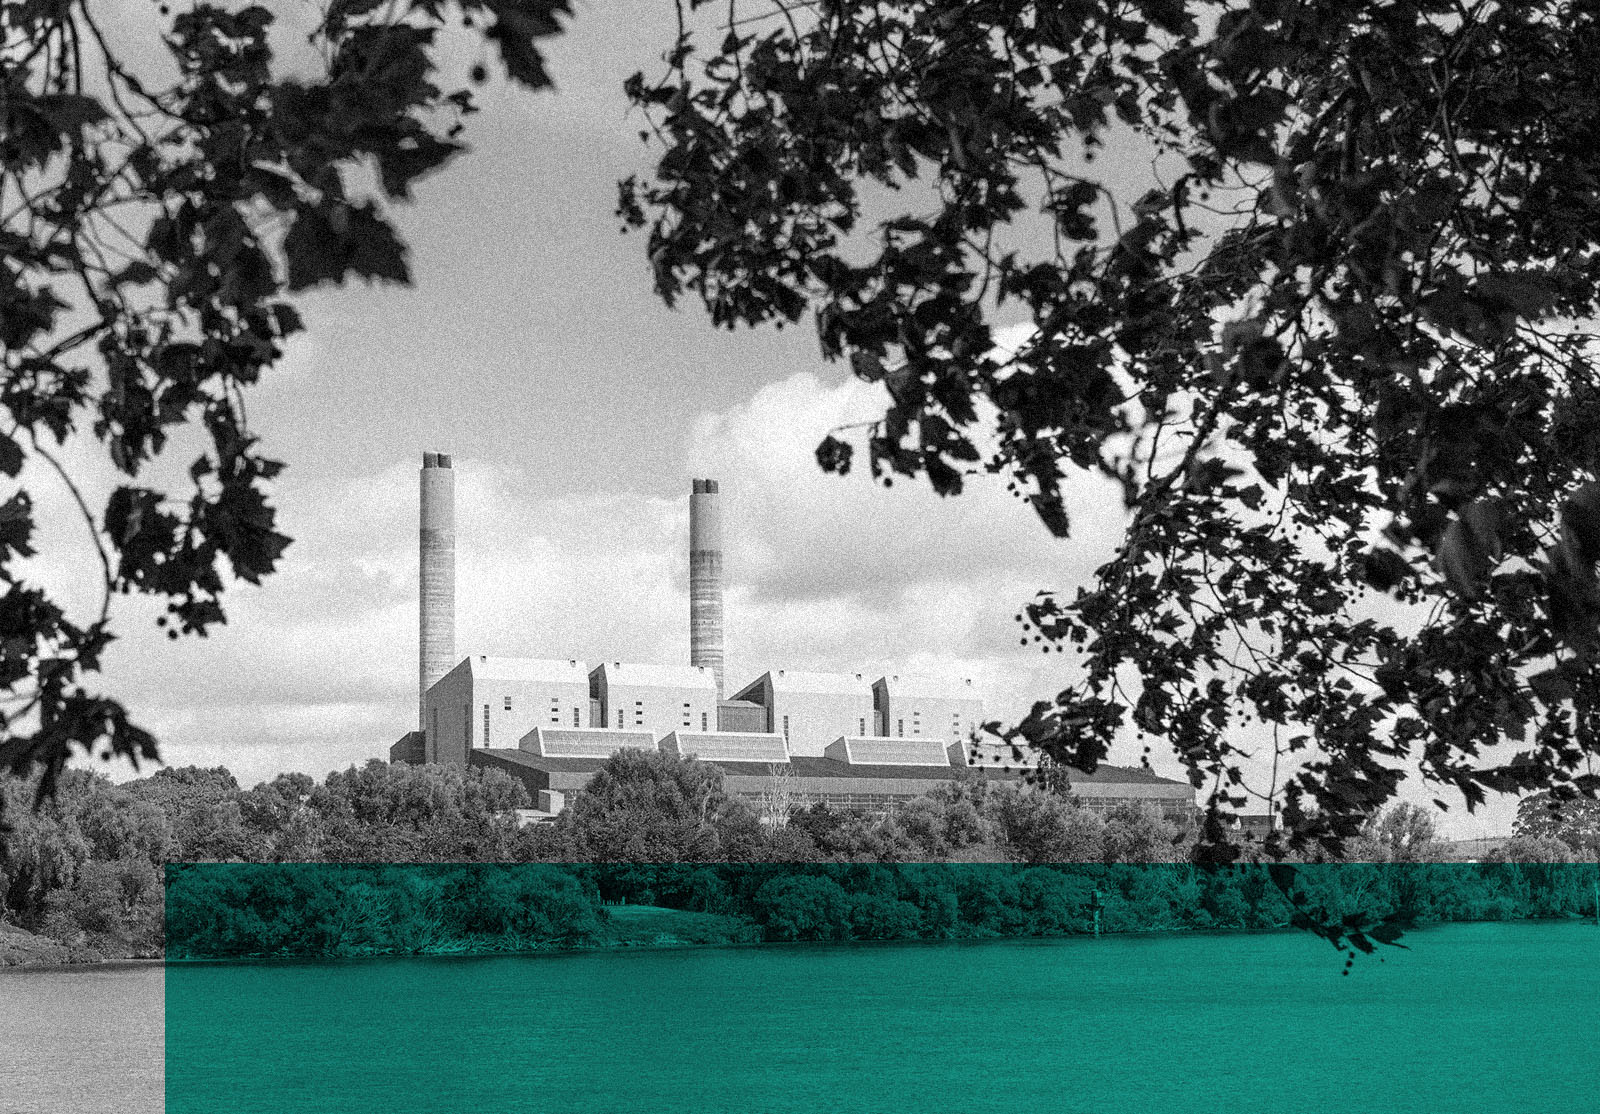 Leaves in the foreground around a coal-fired power station